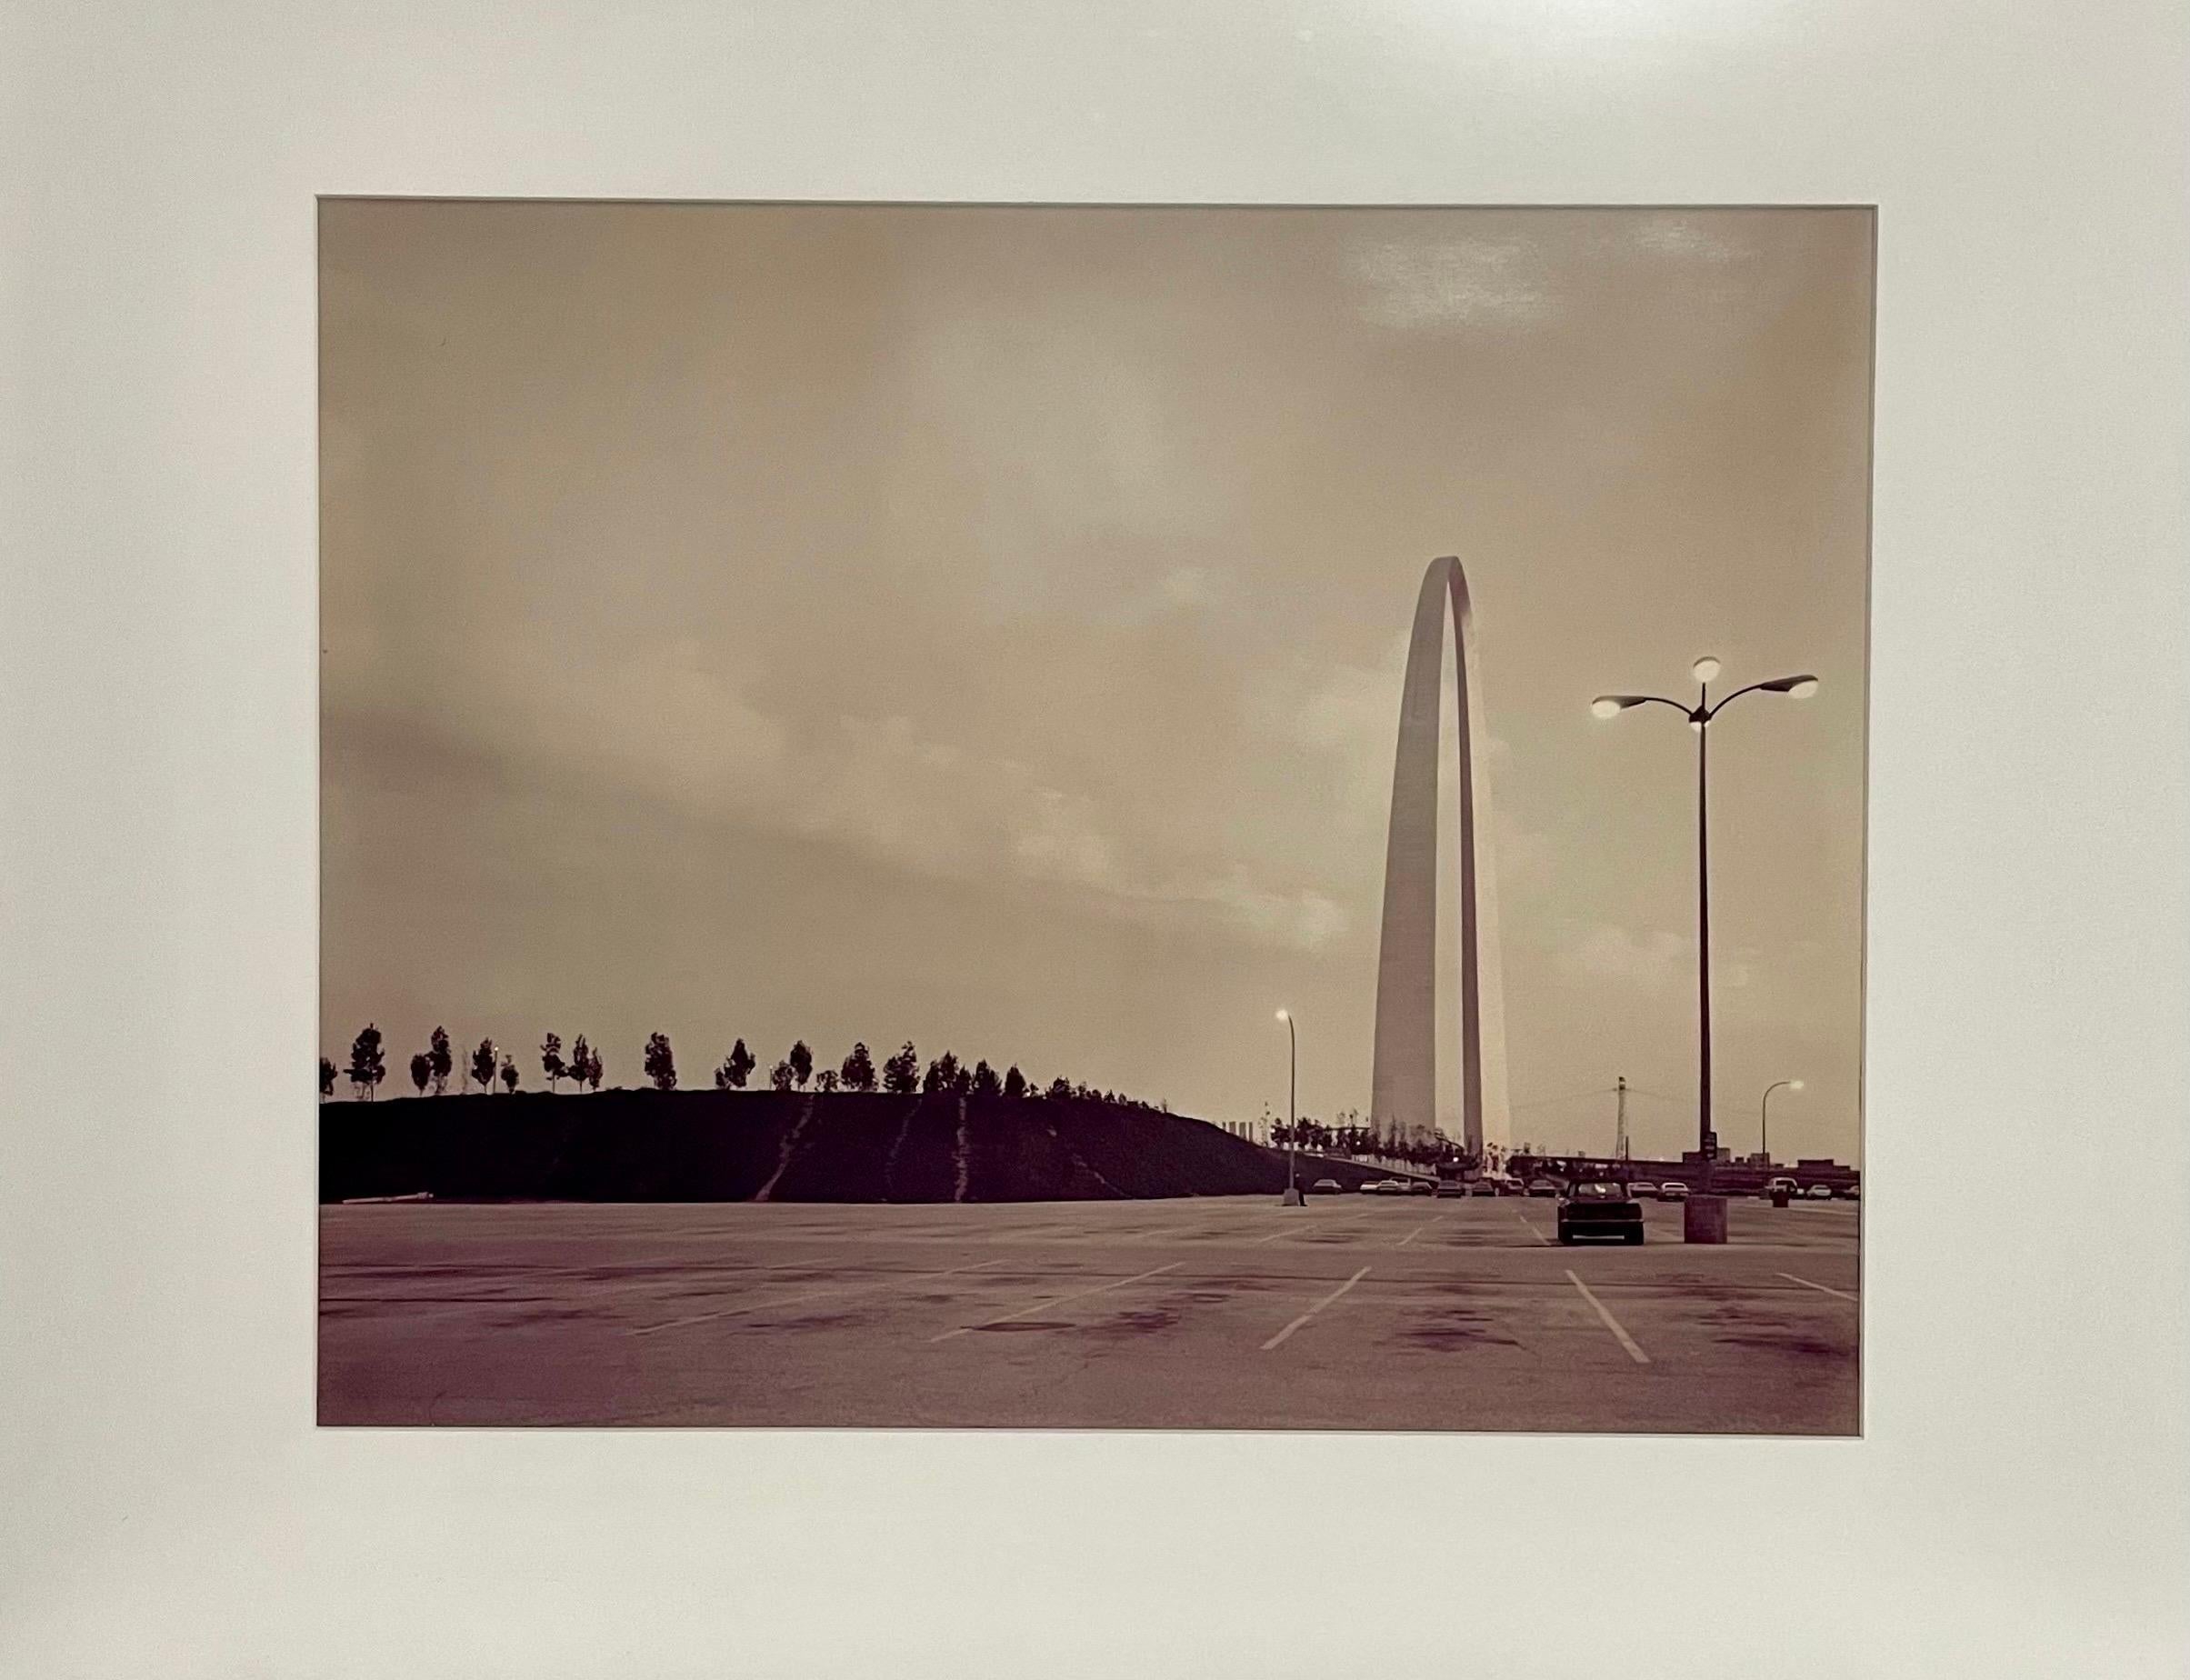 St. Louis and the Arch Vintage Photograph
Title, initials, dated 1977, copyright 1982, and edition B/J on verso 
Provenance: US Bank Visual Arts Department identification sticker. Mercantile Trust Company tag to frame.
Image: 15 x 19 in. (16 X 20),